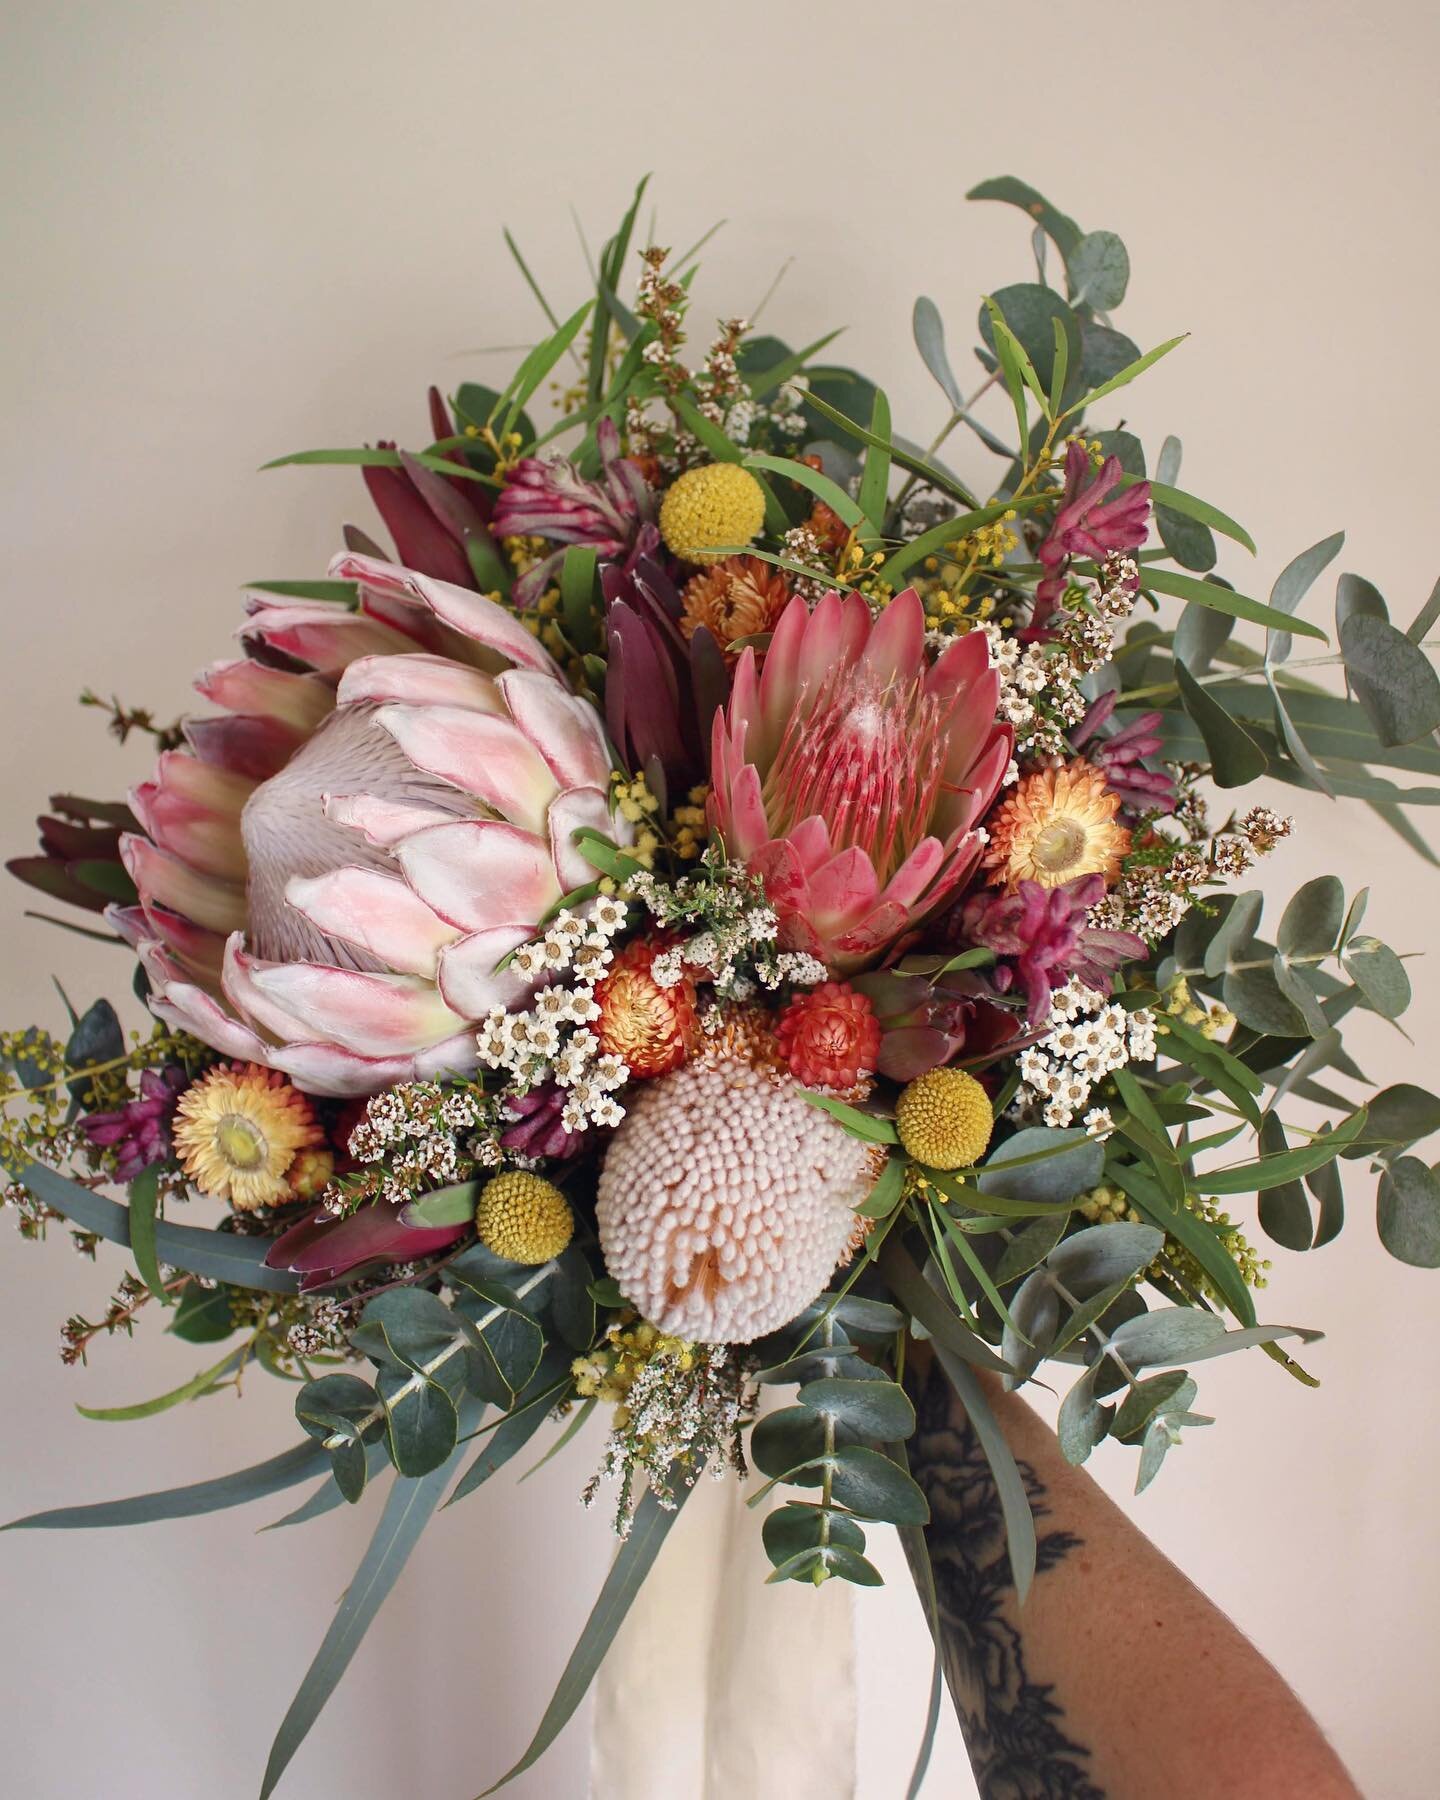 Natives &amp; proteas for Madi 💐

We are excited to be heading into the winter months for some much needed R&amp;R as our main wedding season comes to an end 🫶

We will be flowering our final wedding tomorrow for Renae &amp; Matthew and then have a